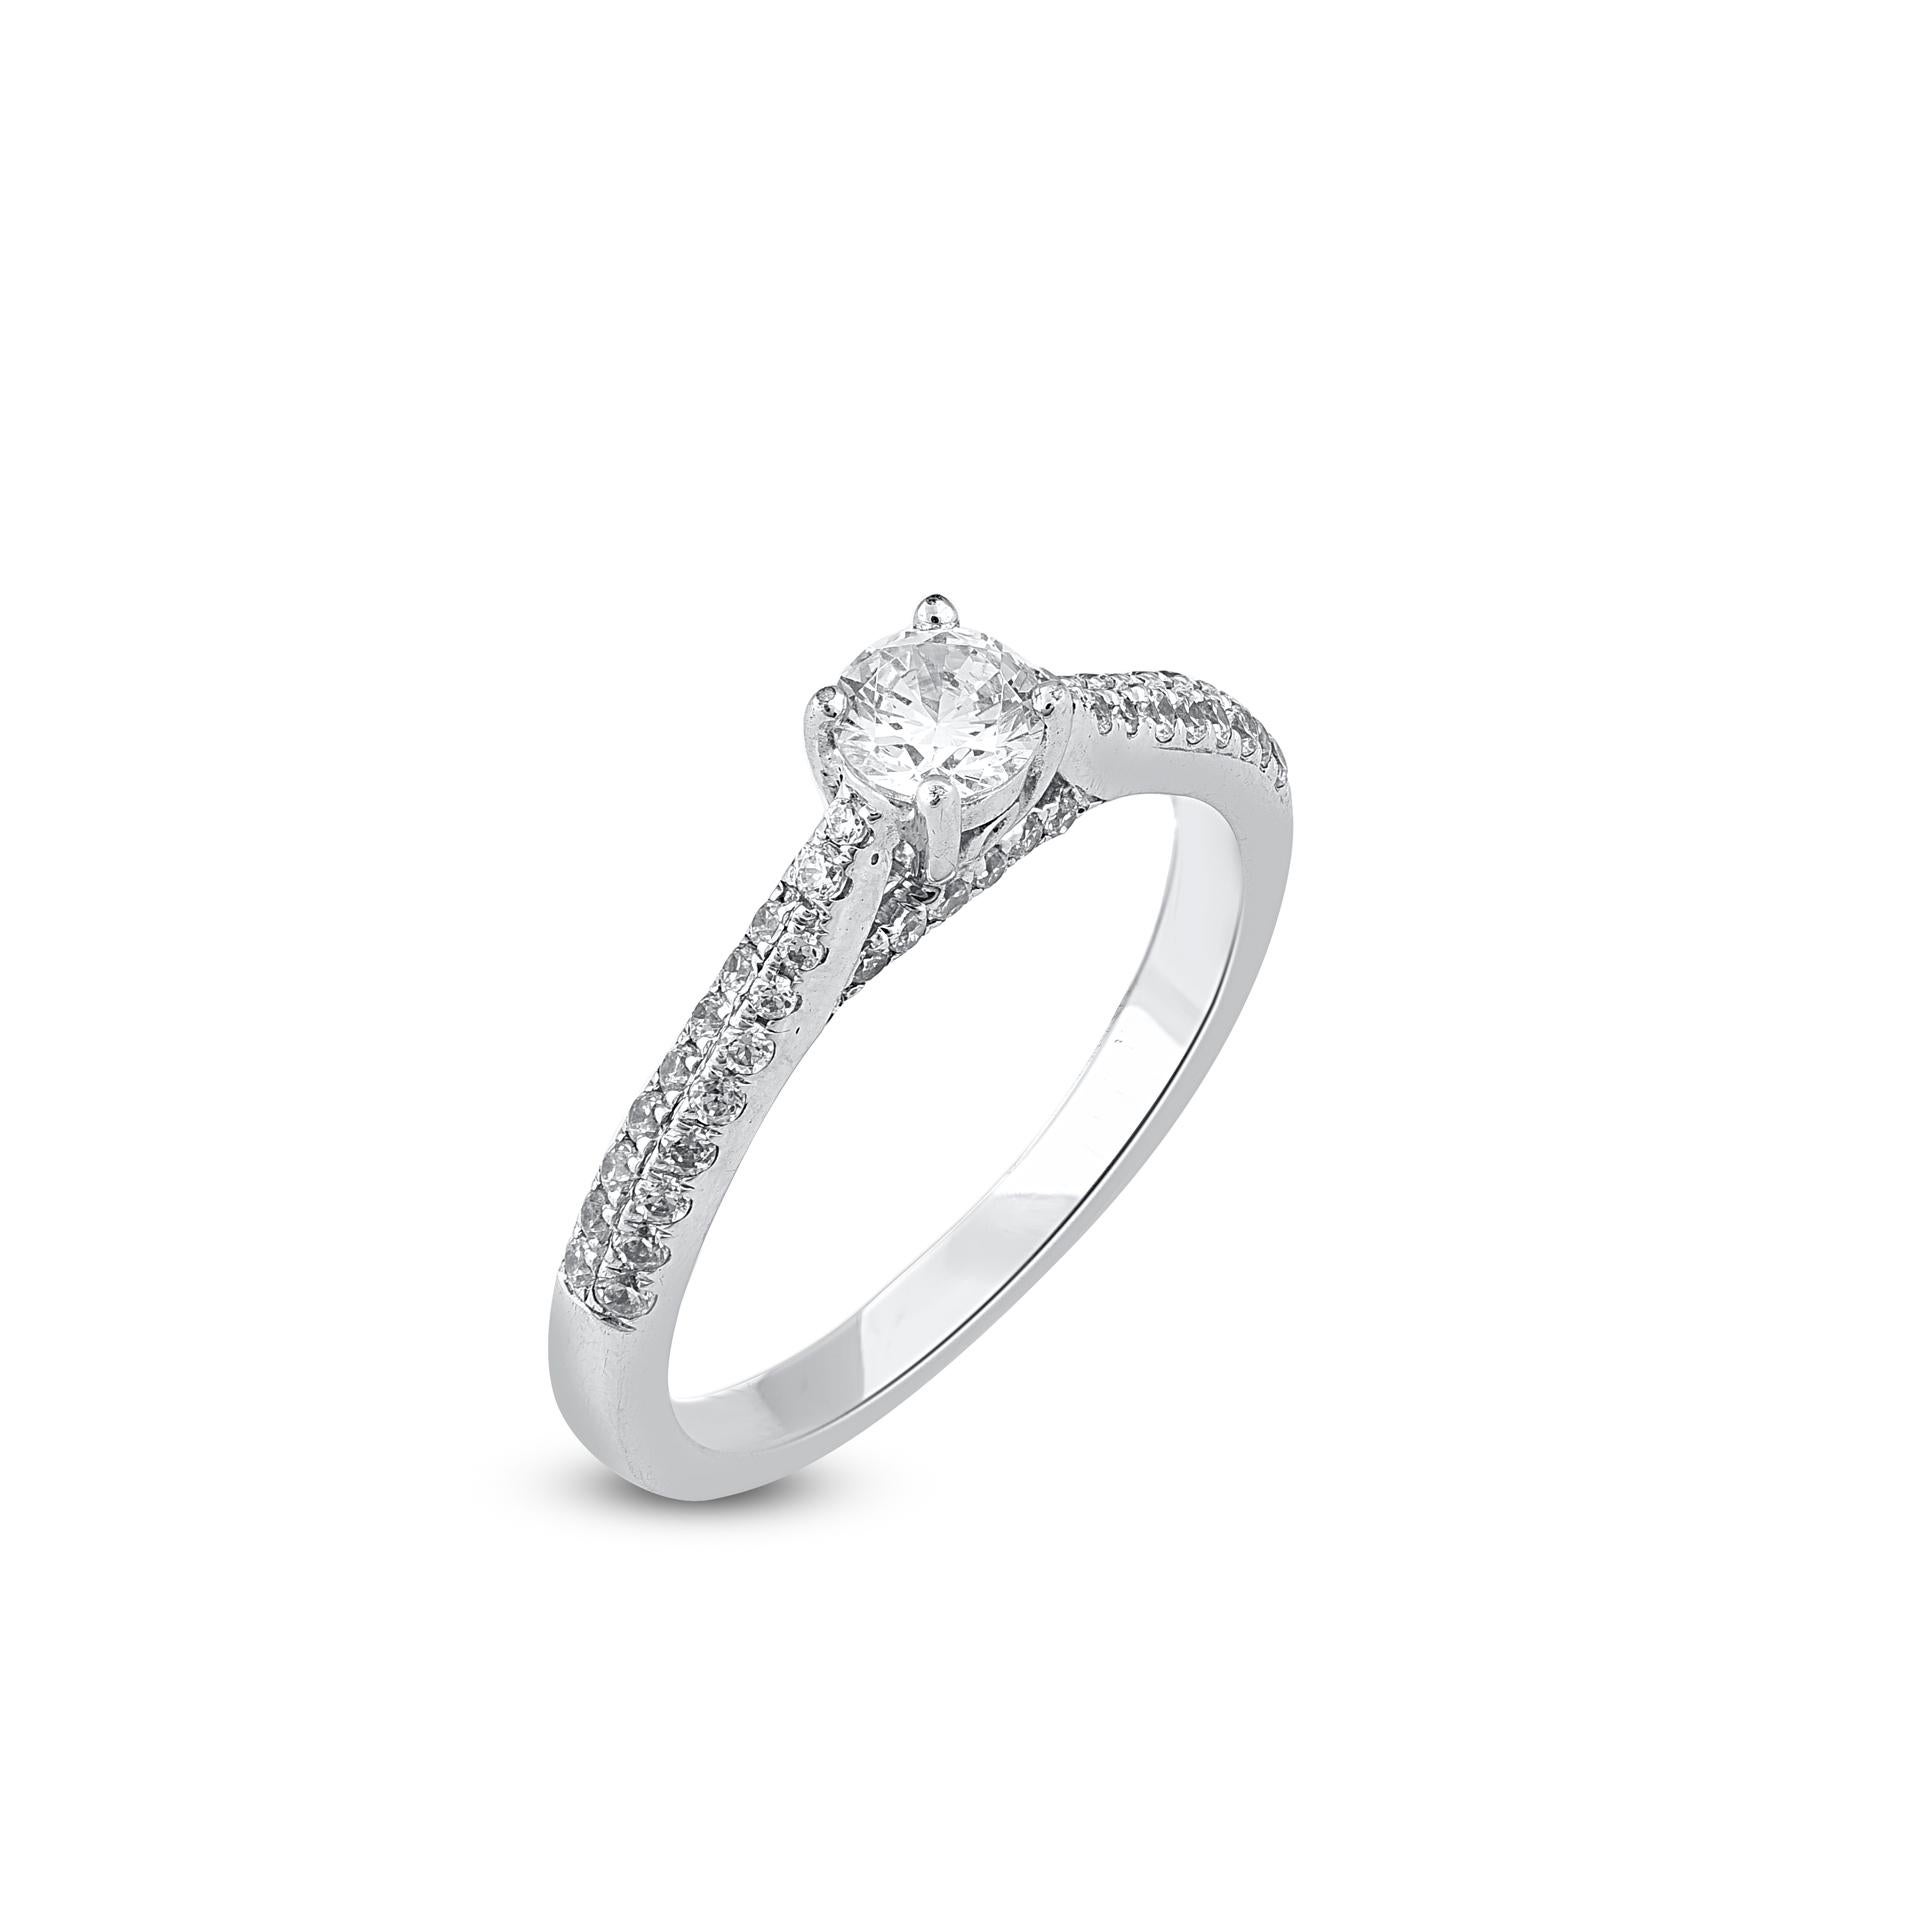 Truly exquisite, this 0.33 ct of center stone and 0.33 ct of lined shank diamond ring is sure to be admired for the inherent classic beauty and elegance within its design. The total weight of diamonds 0.66 carat, G-H color, SI1 clarity and studded